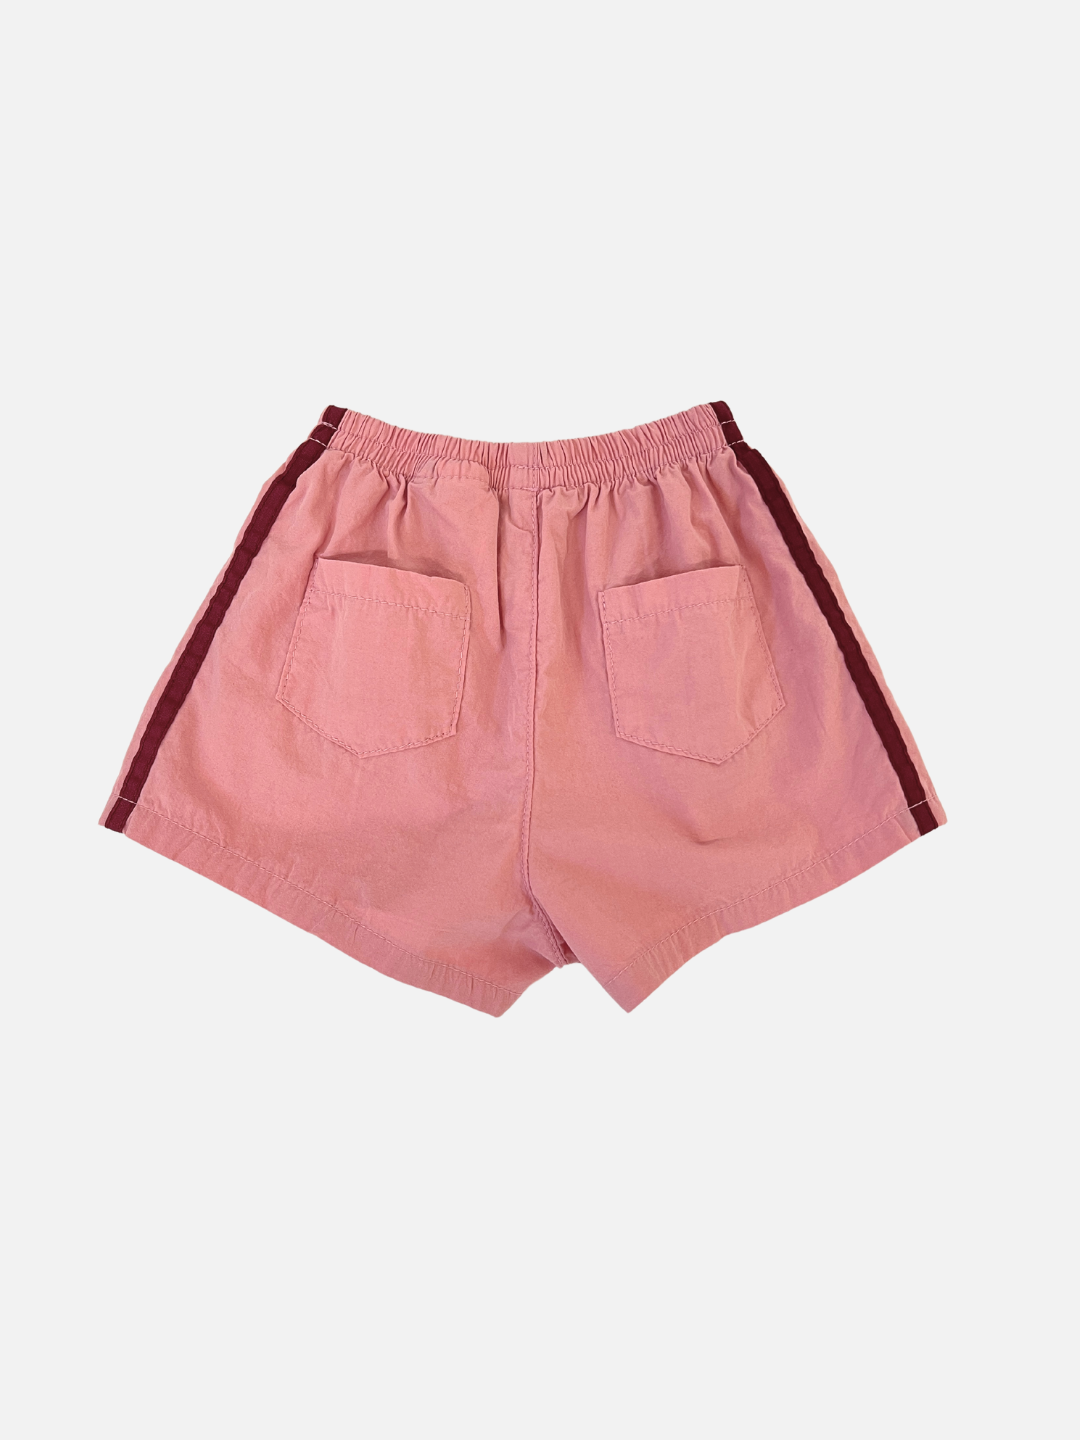 Dusty Pink | Back view of the kids' dusty pink shorts with burgundy stripes on the sides and two back pockets. 